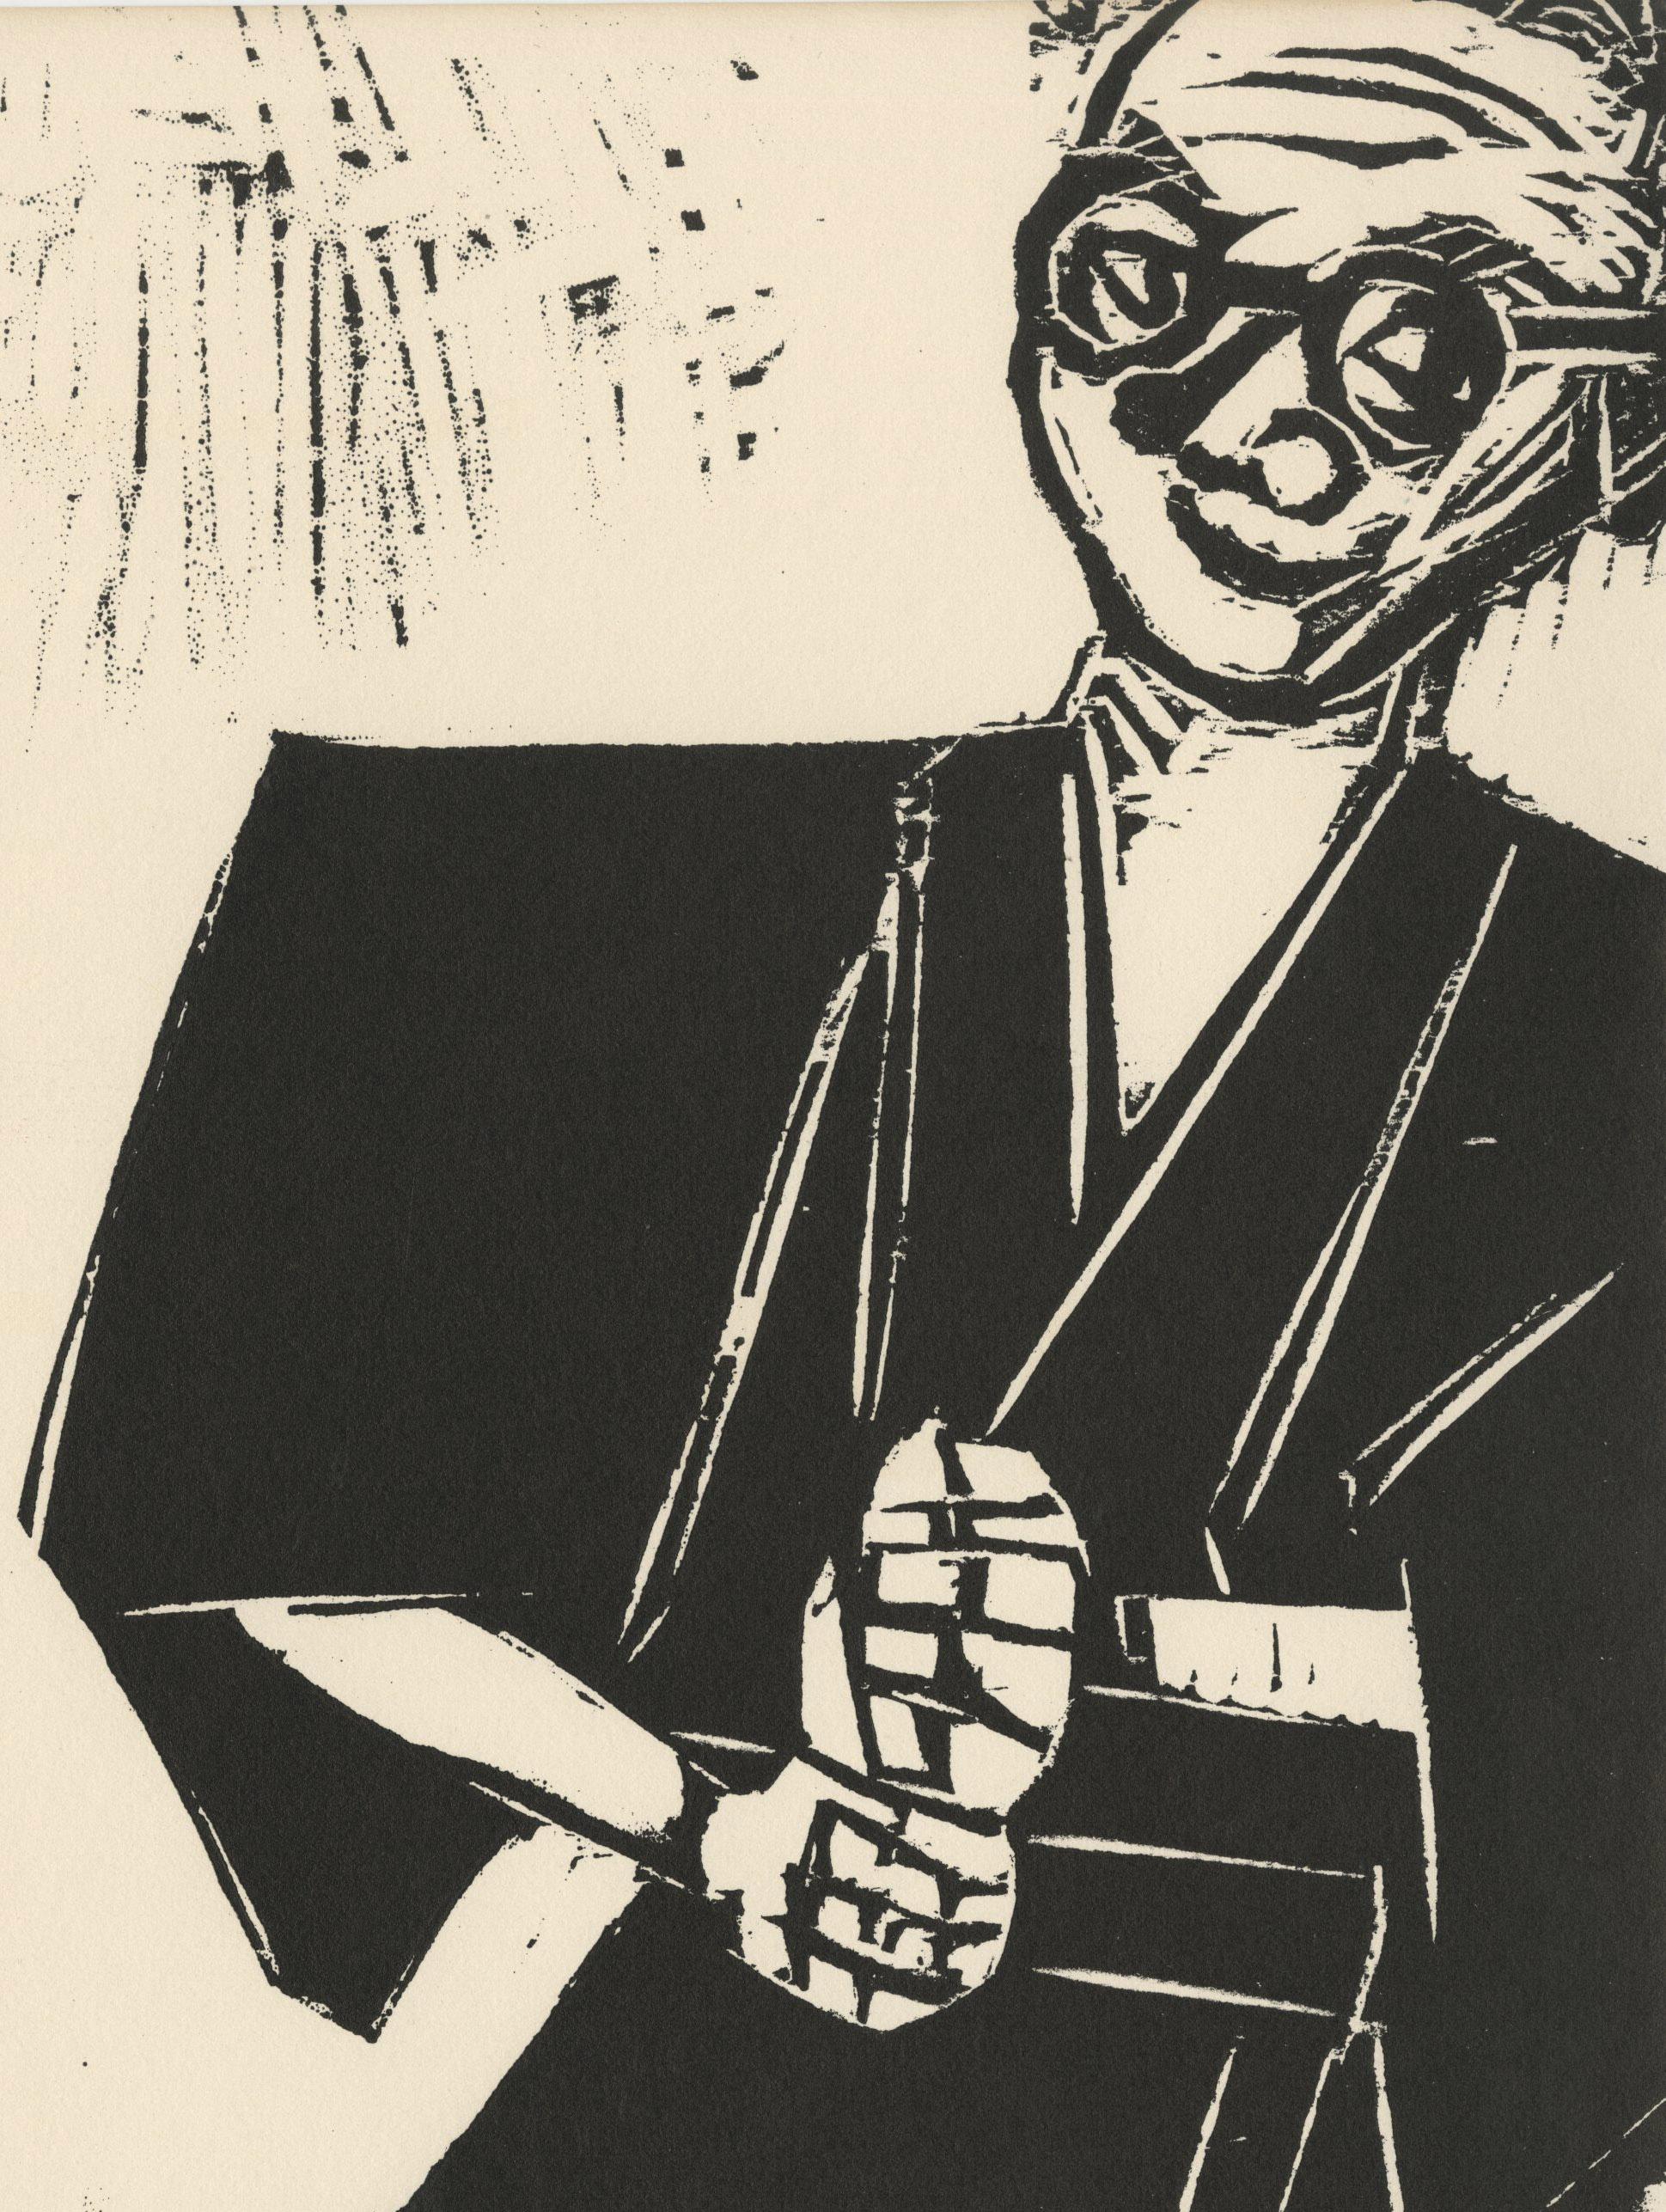 At New York (Self Portrait)
Woodcut, 1961
Unsigned (as issued)
From: The 